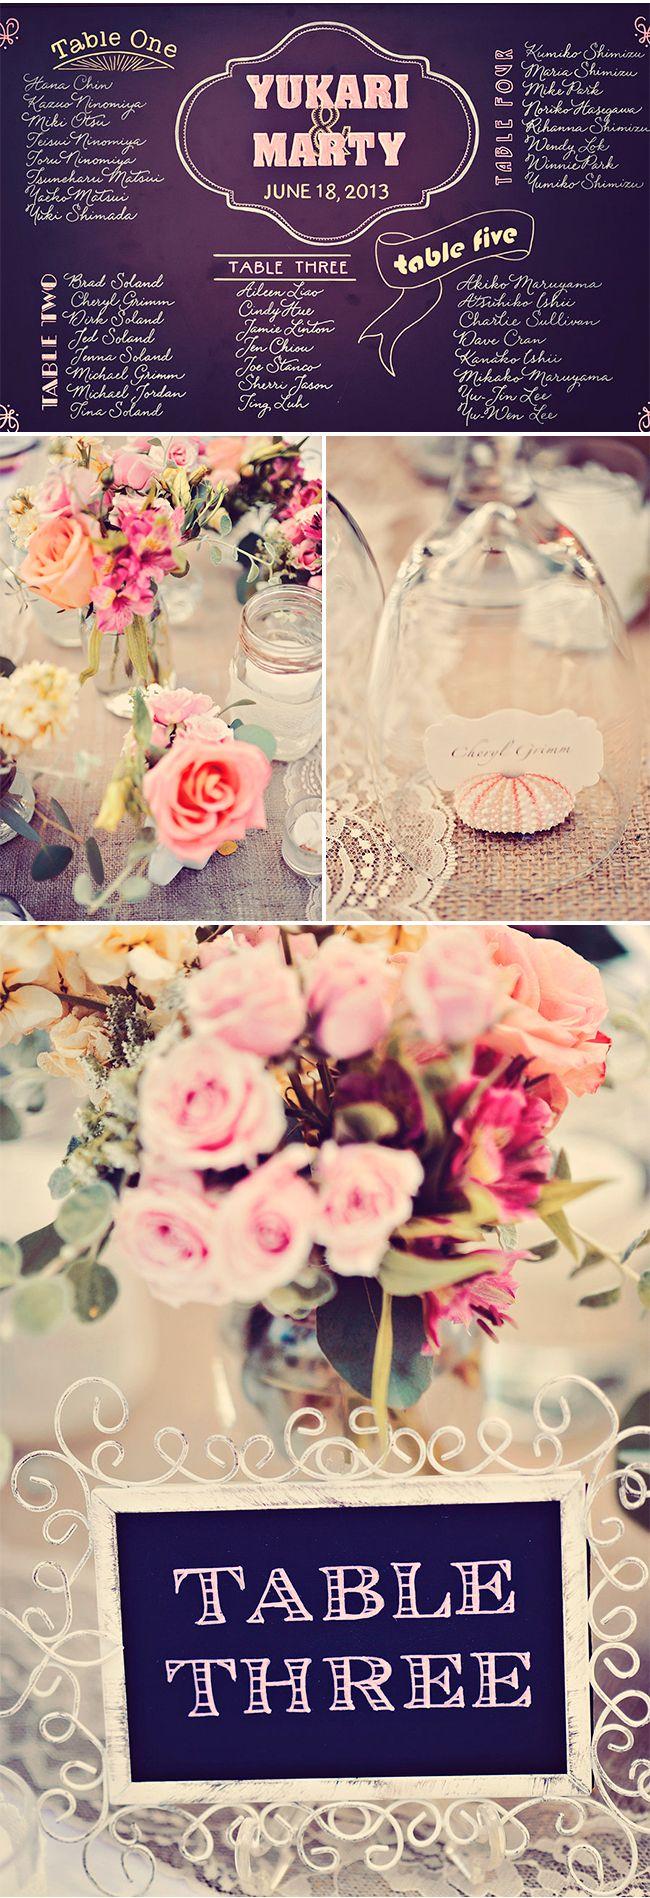 Wedding - Details And Props By Opihi Love Event Design